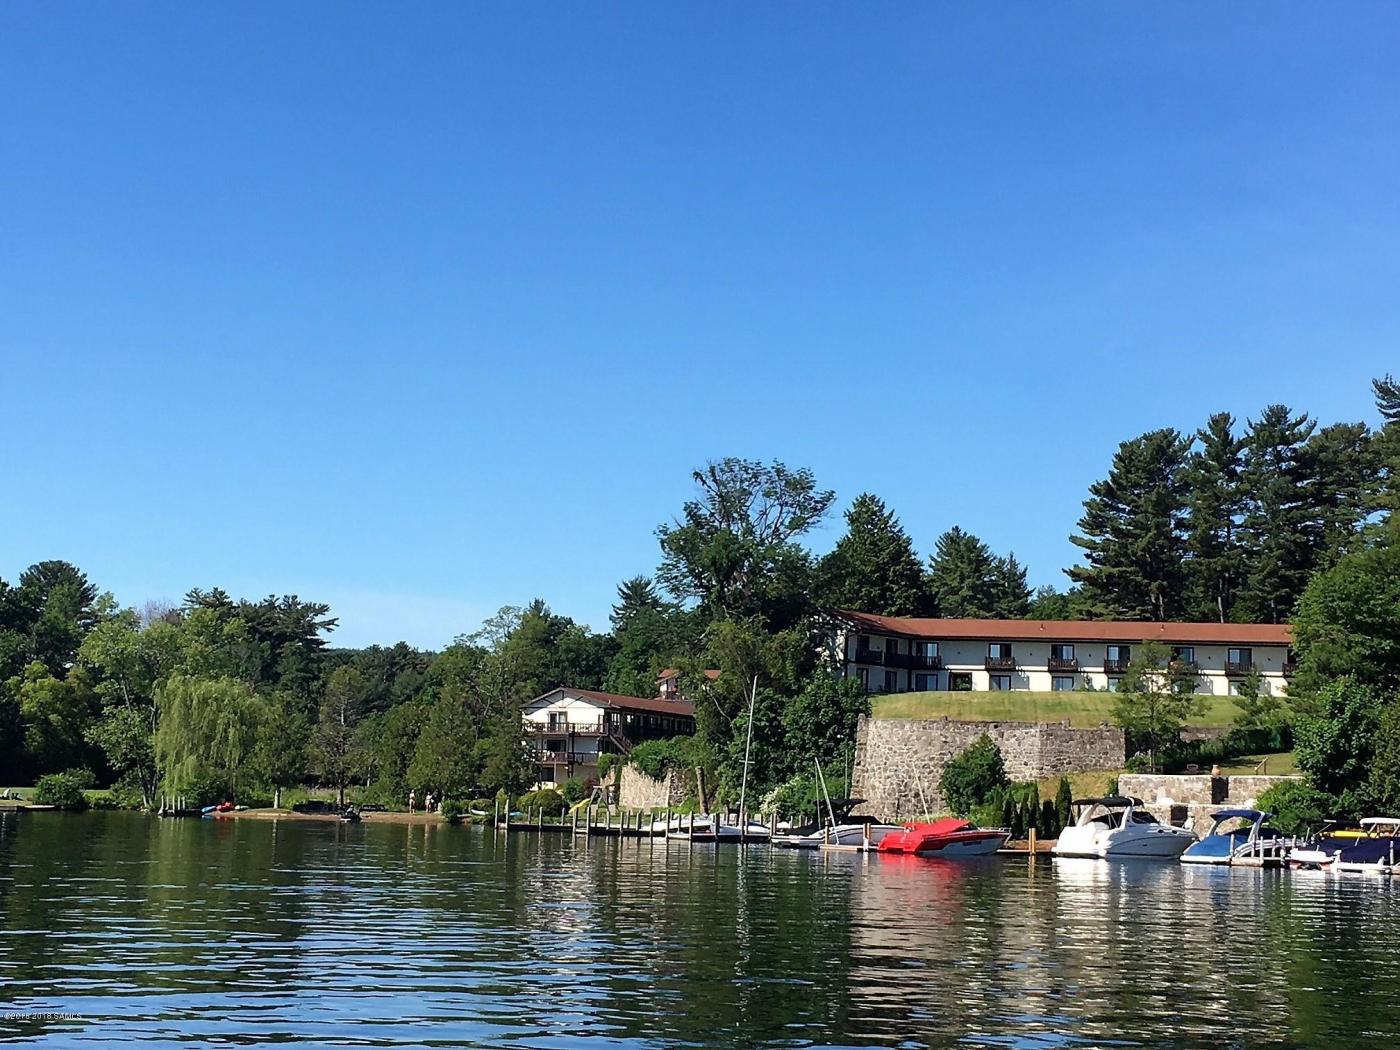 Lakefront Lake George Resort In Bolton Landing Property Listing From